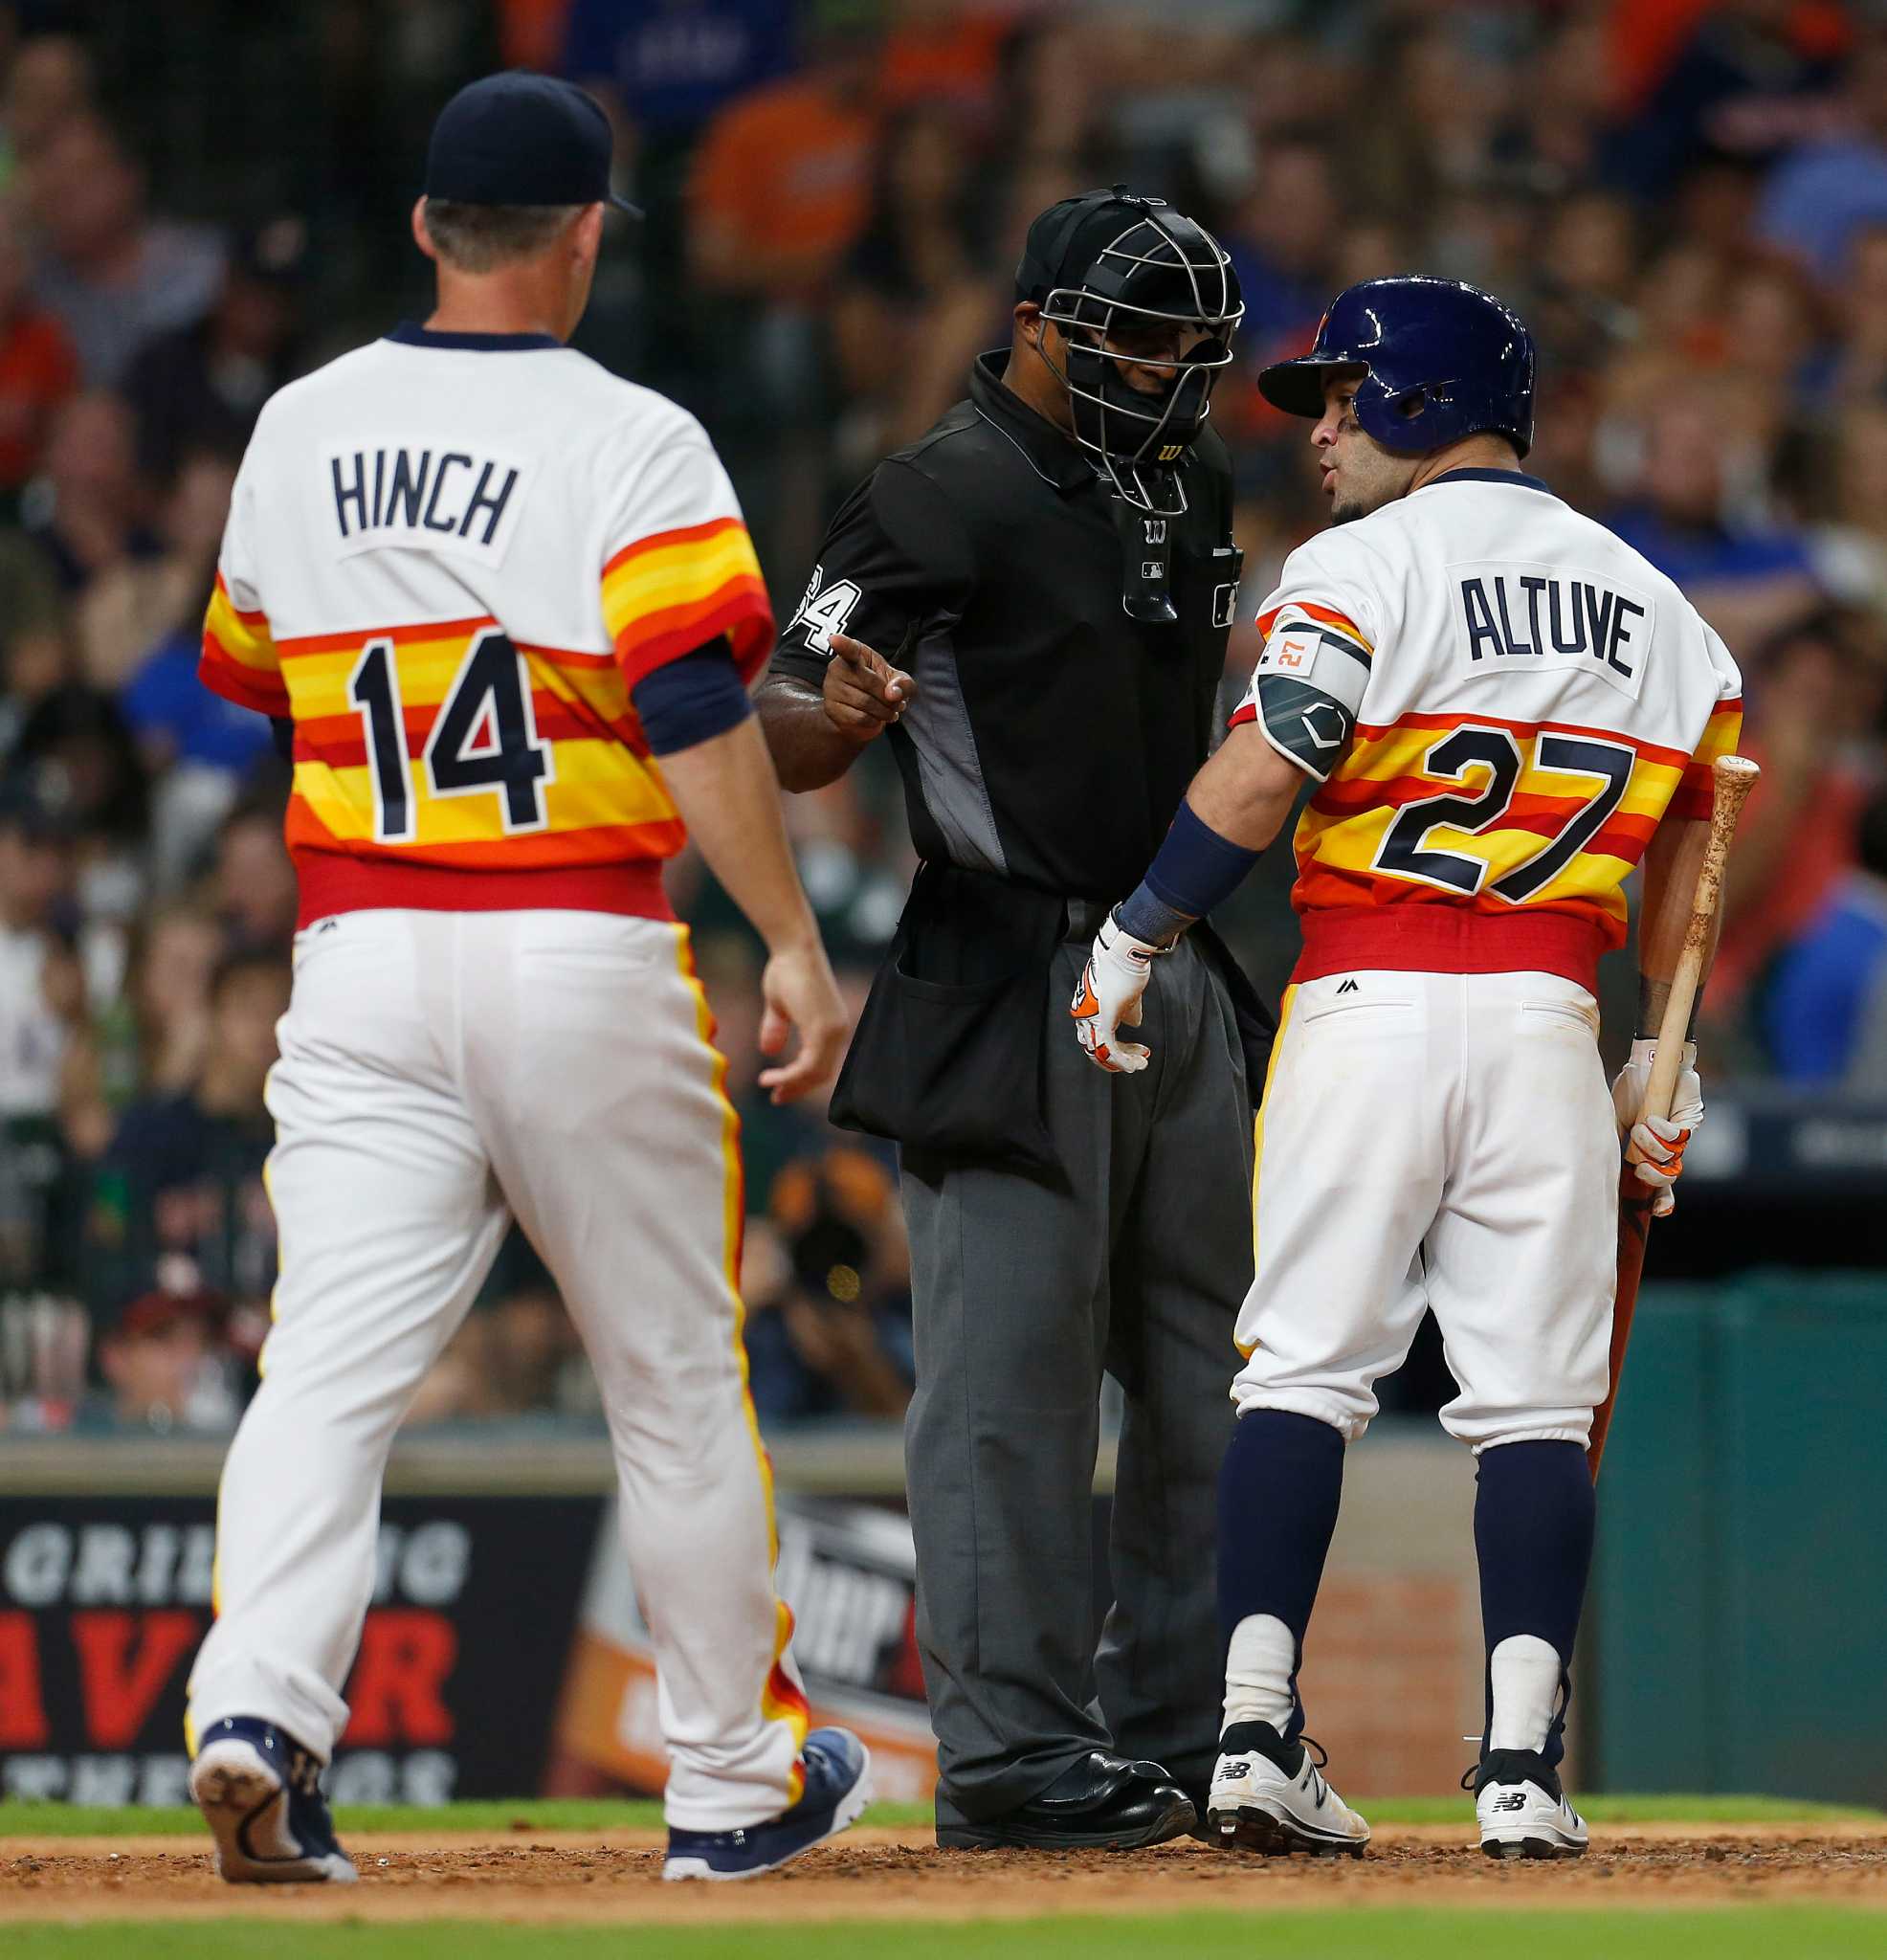 Jose Altuve earns first ejection for arguing strike zone in Astros